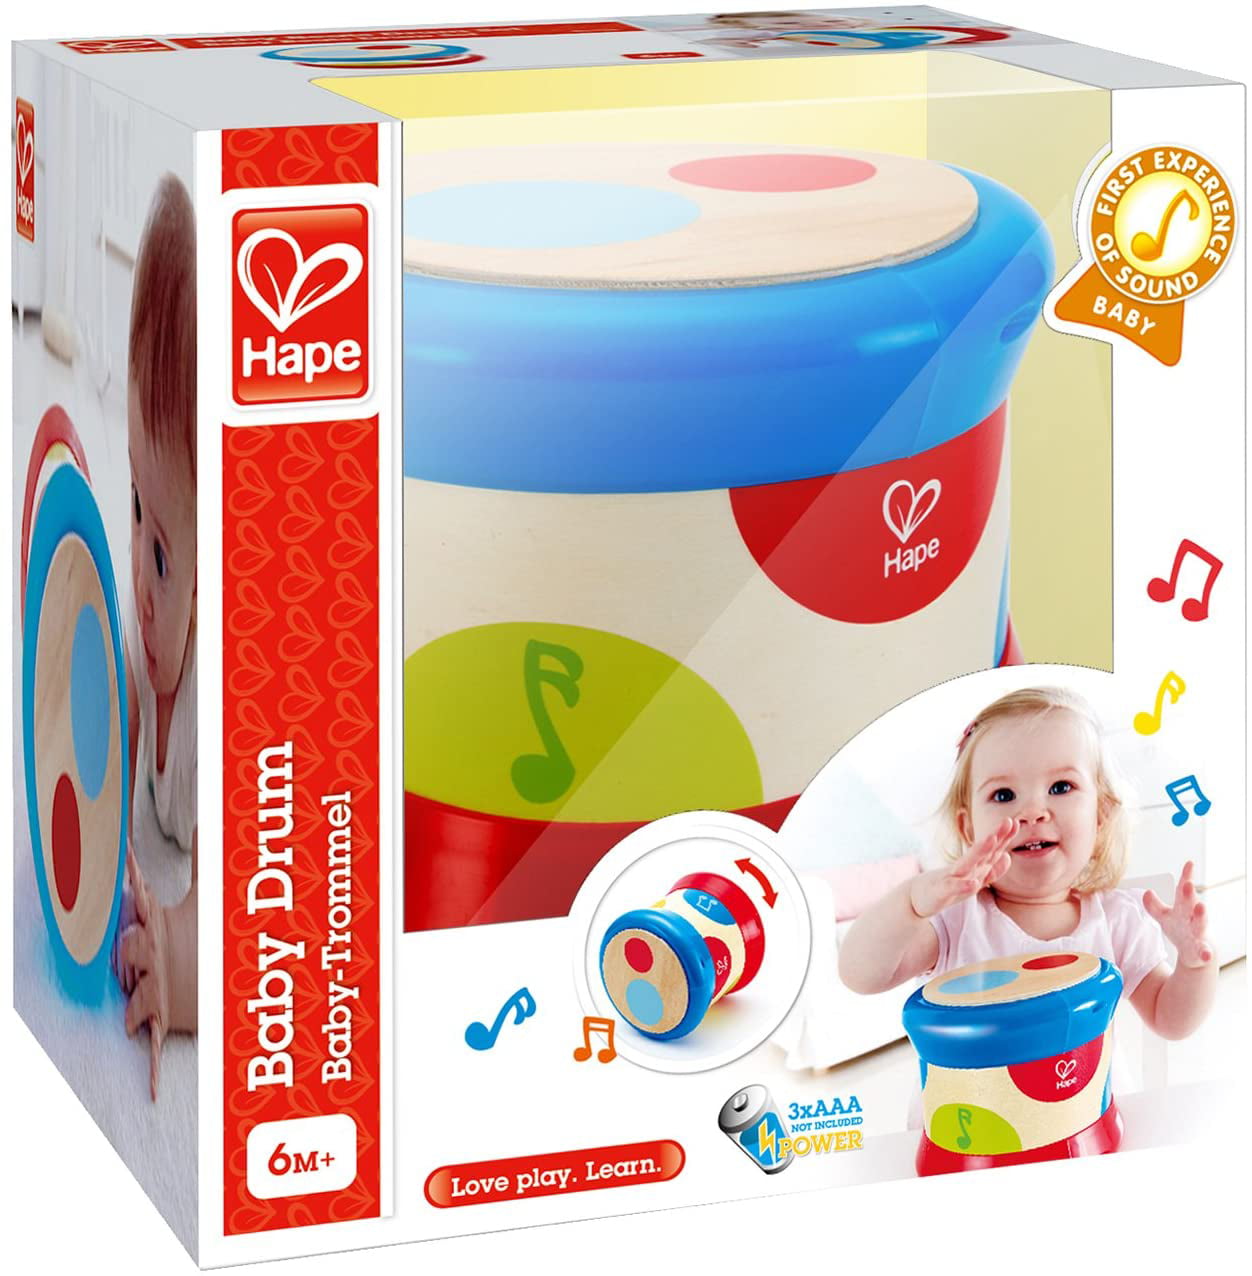 Hape Baby Drum Toddler Musical Electronic Rolling Toy 6-months for sale online 